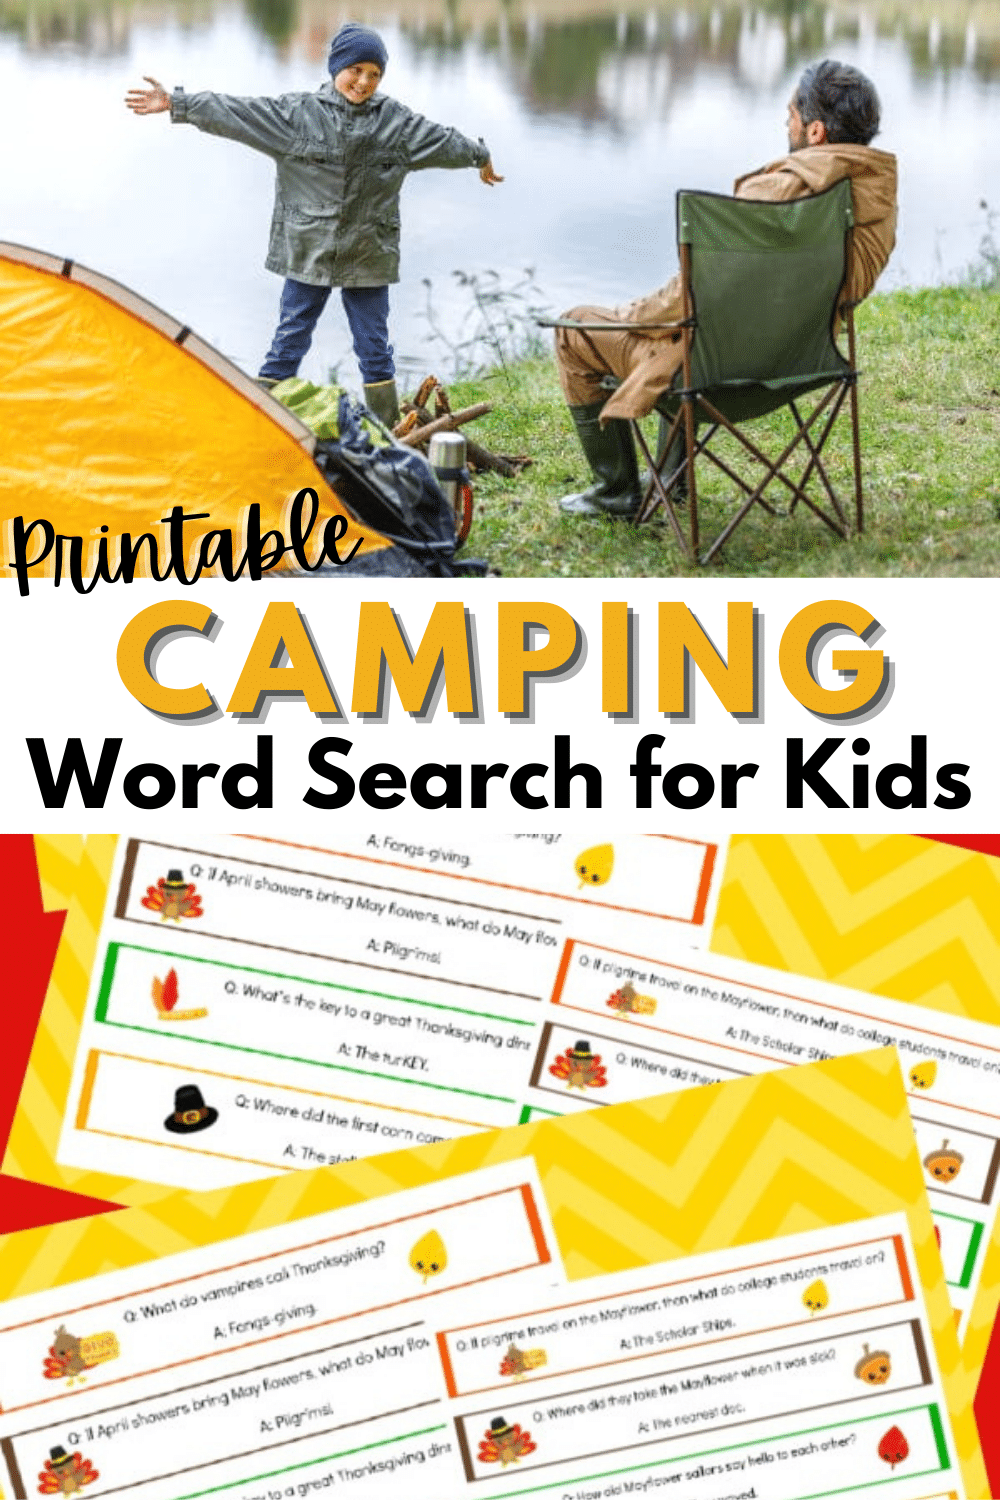 A printable camping word search for kids will get children in the camping mood. It will keep the kids occupied on the drive to your favorite campsite. #camping #printables #wordsearch via @wondermomwannab